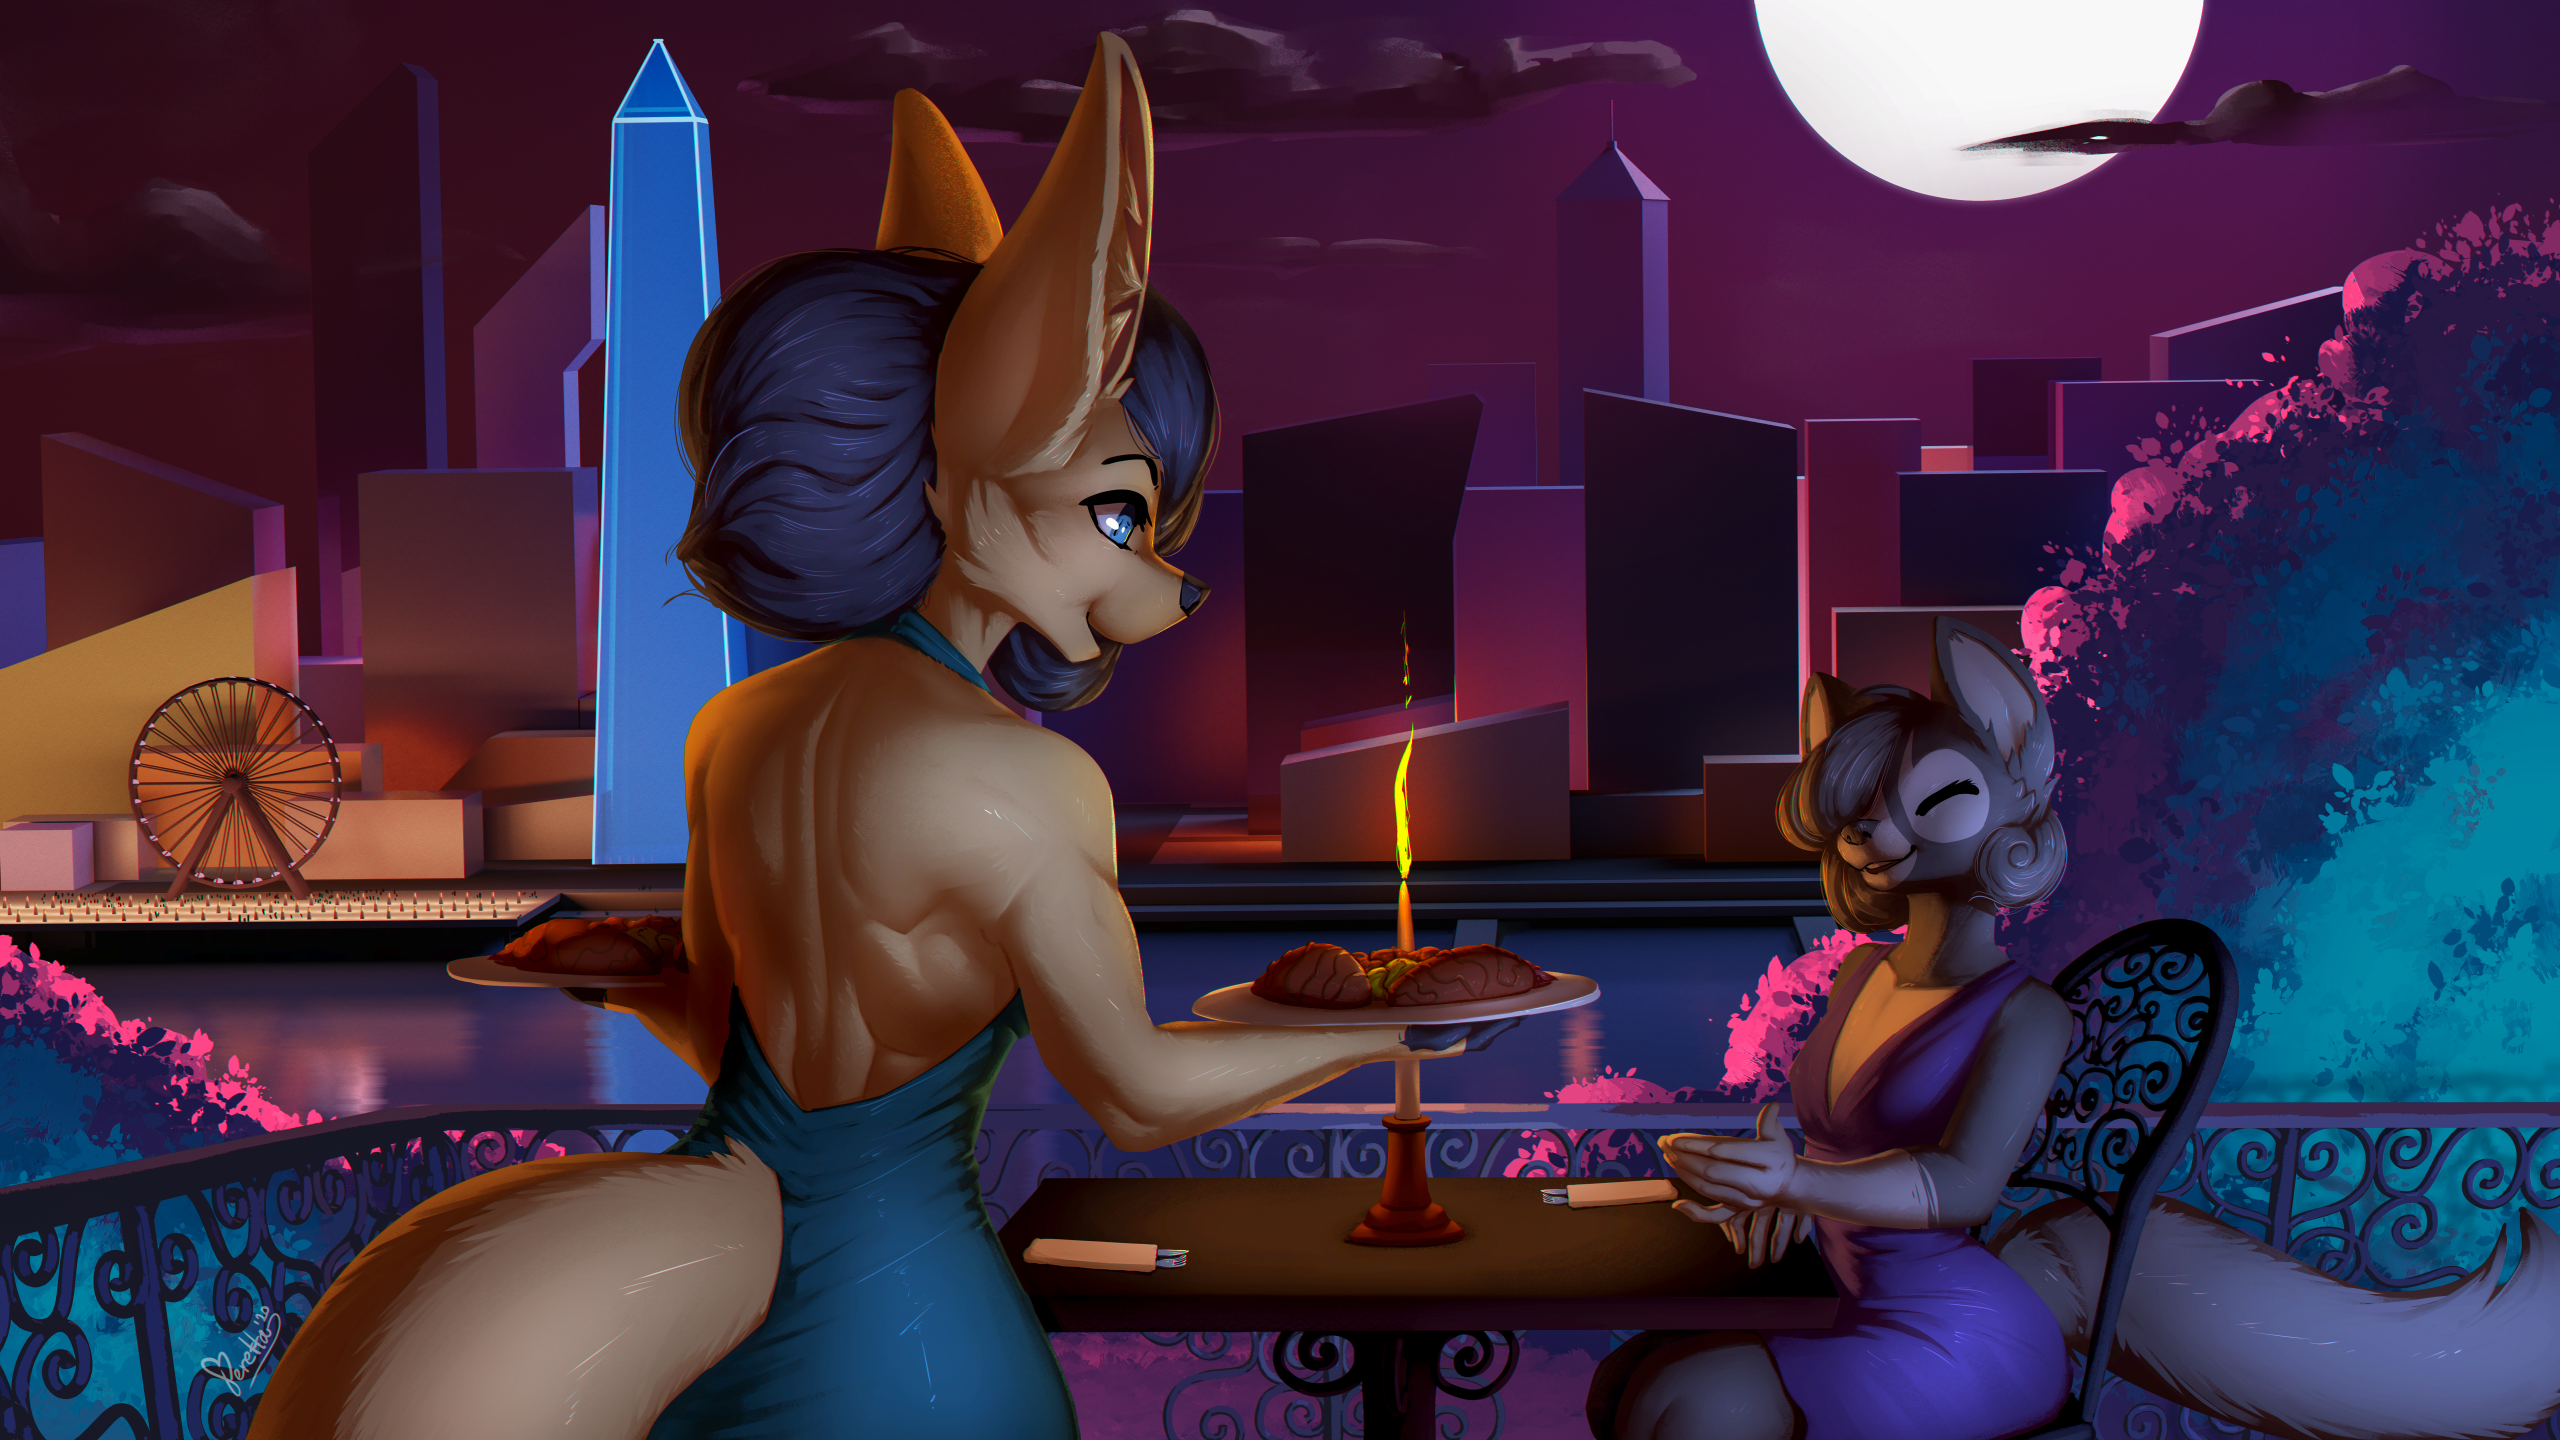 General 2560x1440 feretta furry tail Anthro digital art animal ears backless backless dress moonlight plates food table dress hair over one eye closed eyes smiling fork knife candles fire water handrail standing sitting